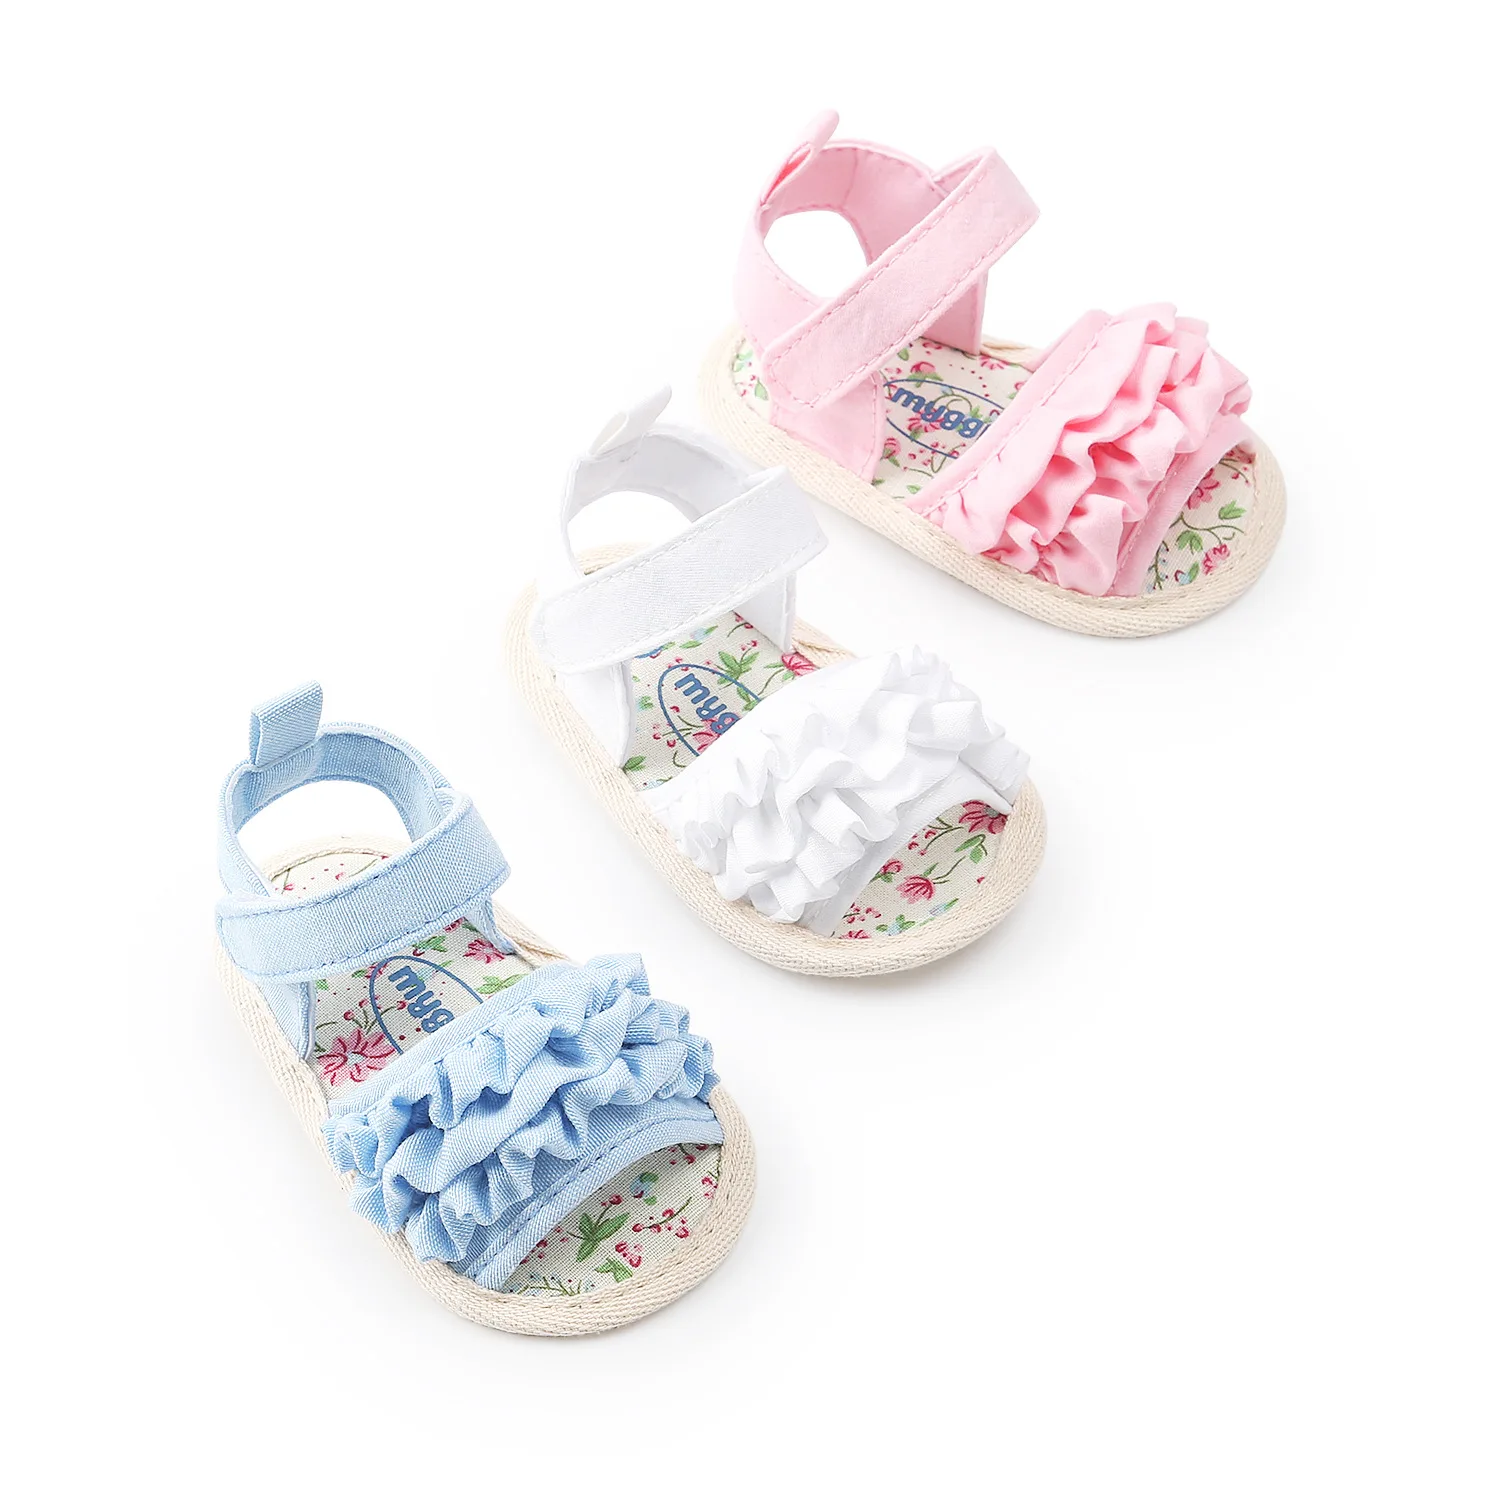 

Hot selling cotton fabric flowers lace Soft sole 0-2 years toddler girl baby sandals shoes, White,pink,black